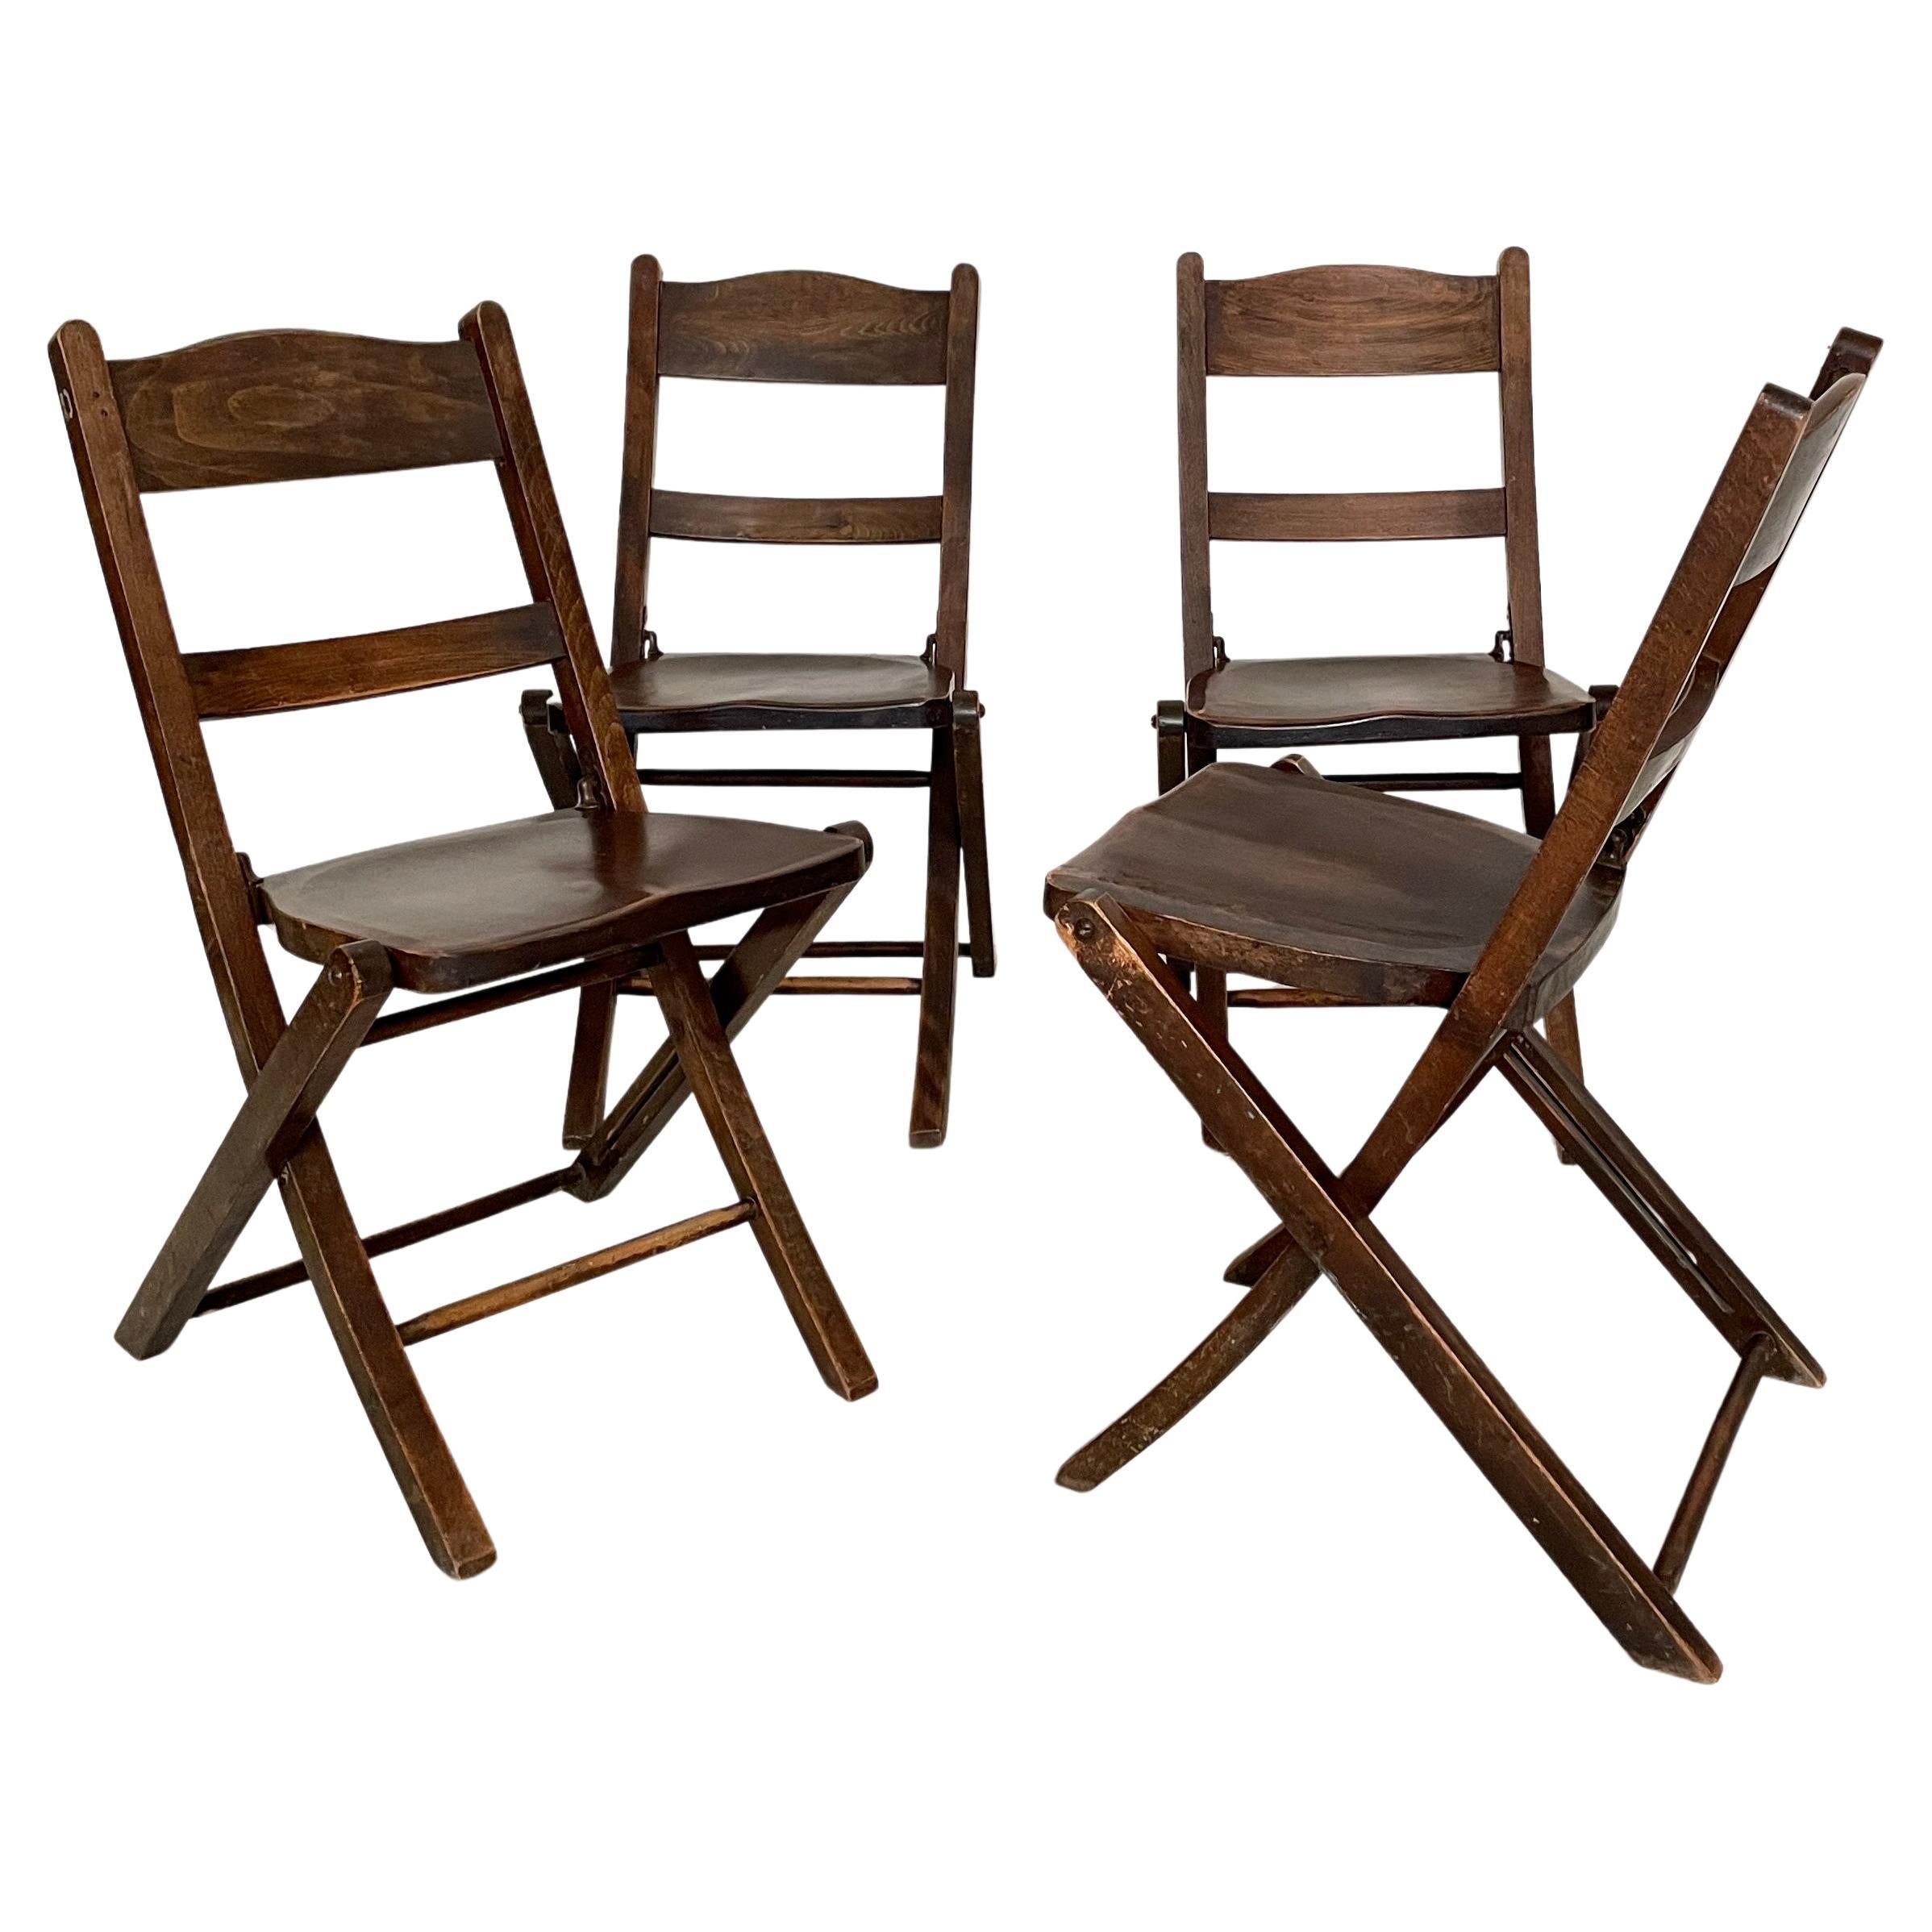 Set of 4 Art Deco Folding Chairs in Brown Beech and Ash, around 1930